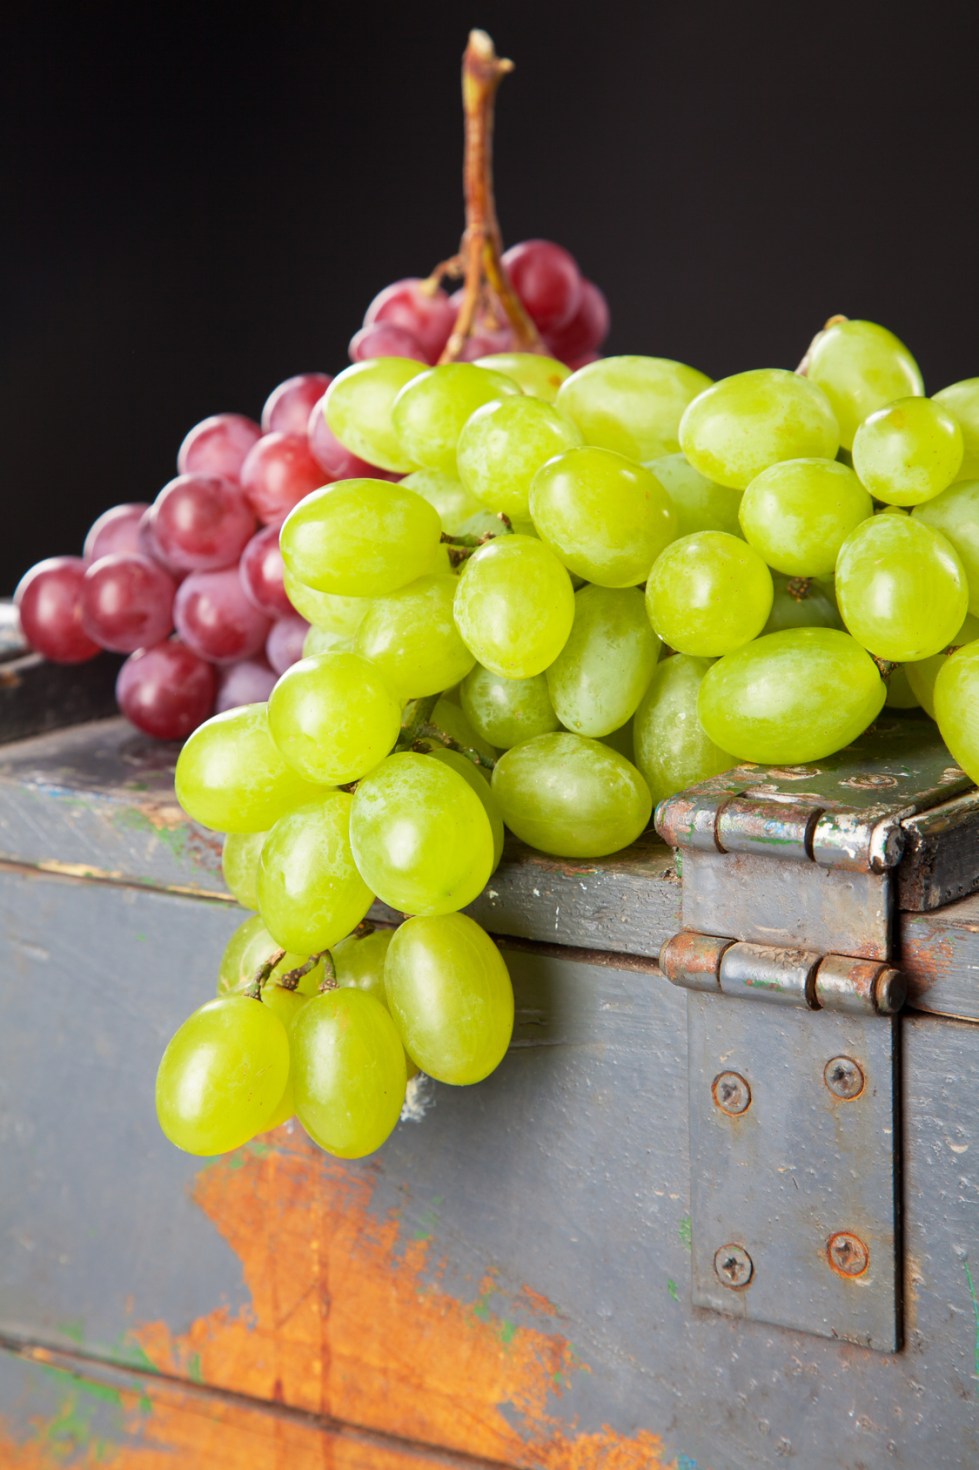 Grapes on a wooden crate